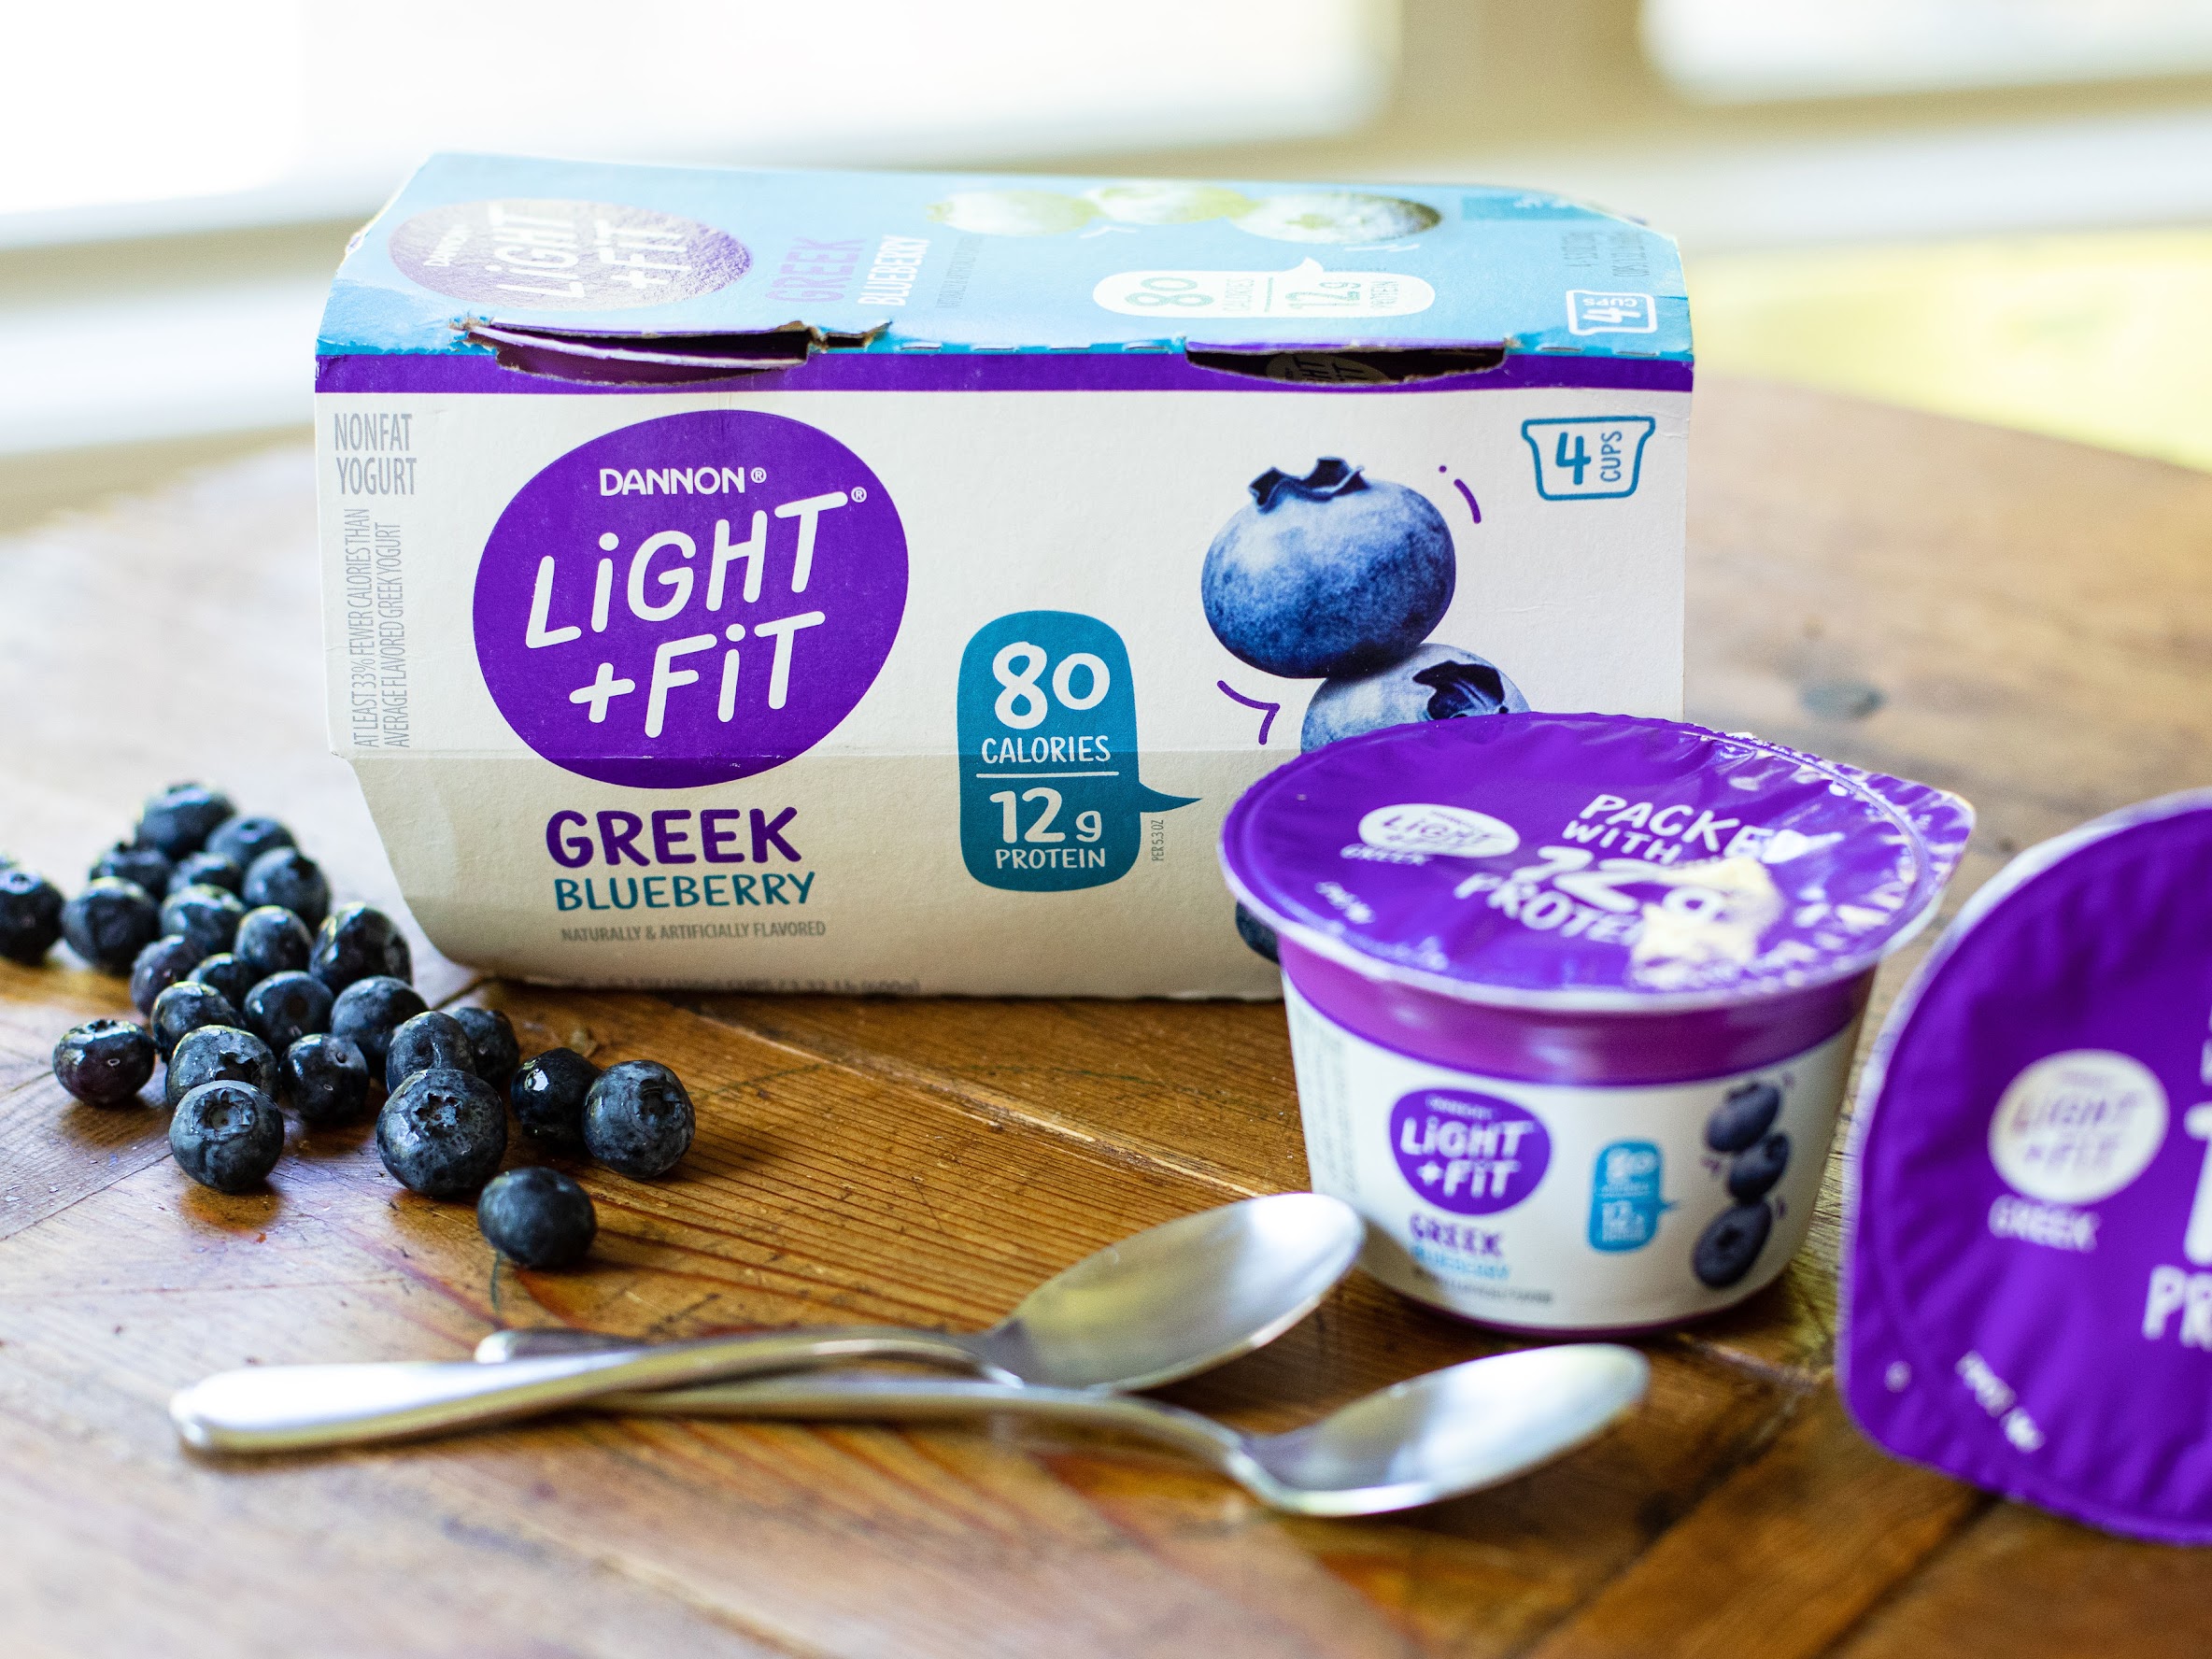 Still Time For Savings On Your Favorite Dannon Light & Fit 4-Pack At Publix on I Heart Publix